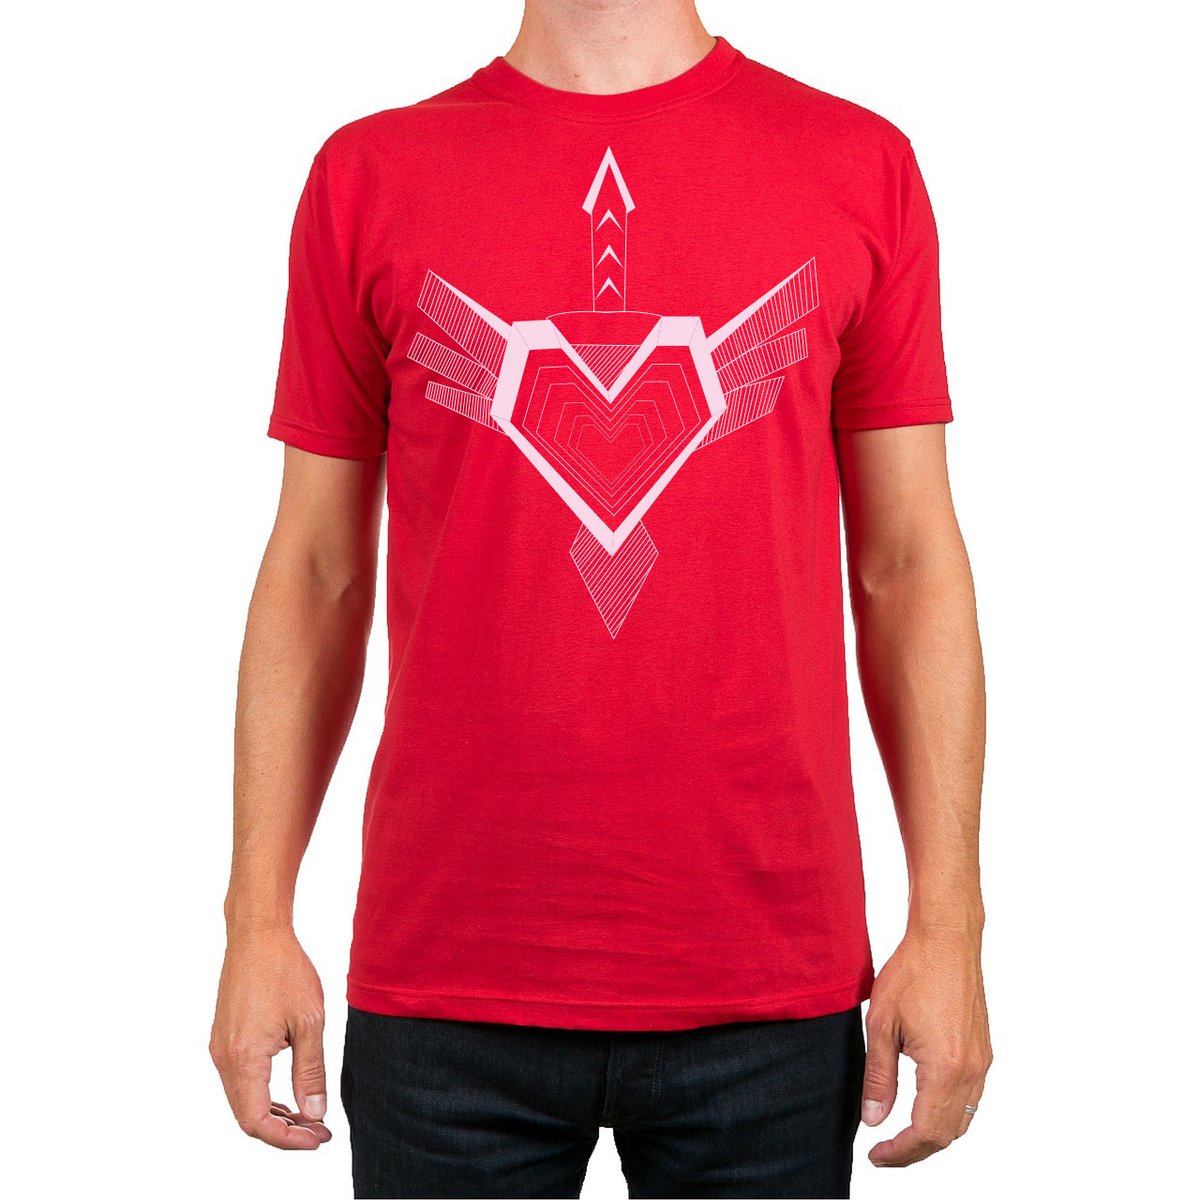 A  shirt for strong love
#heartshield #heartsword #stronglove #heartstrike #loveattack #loveshield #lovesword